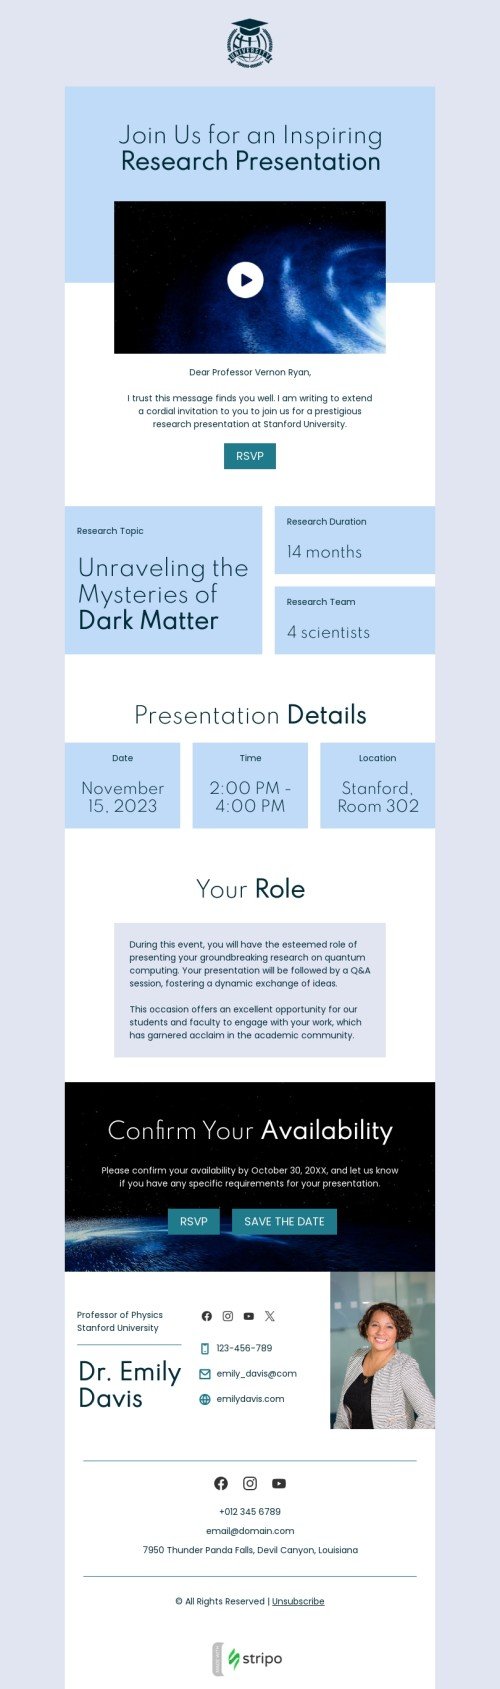 Events email template "Inspiring research presentation" for professor email industrydesktop view